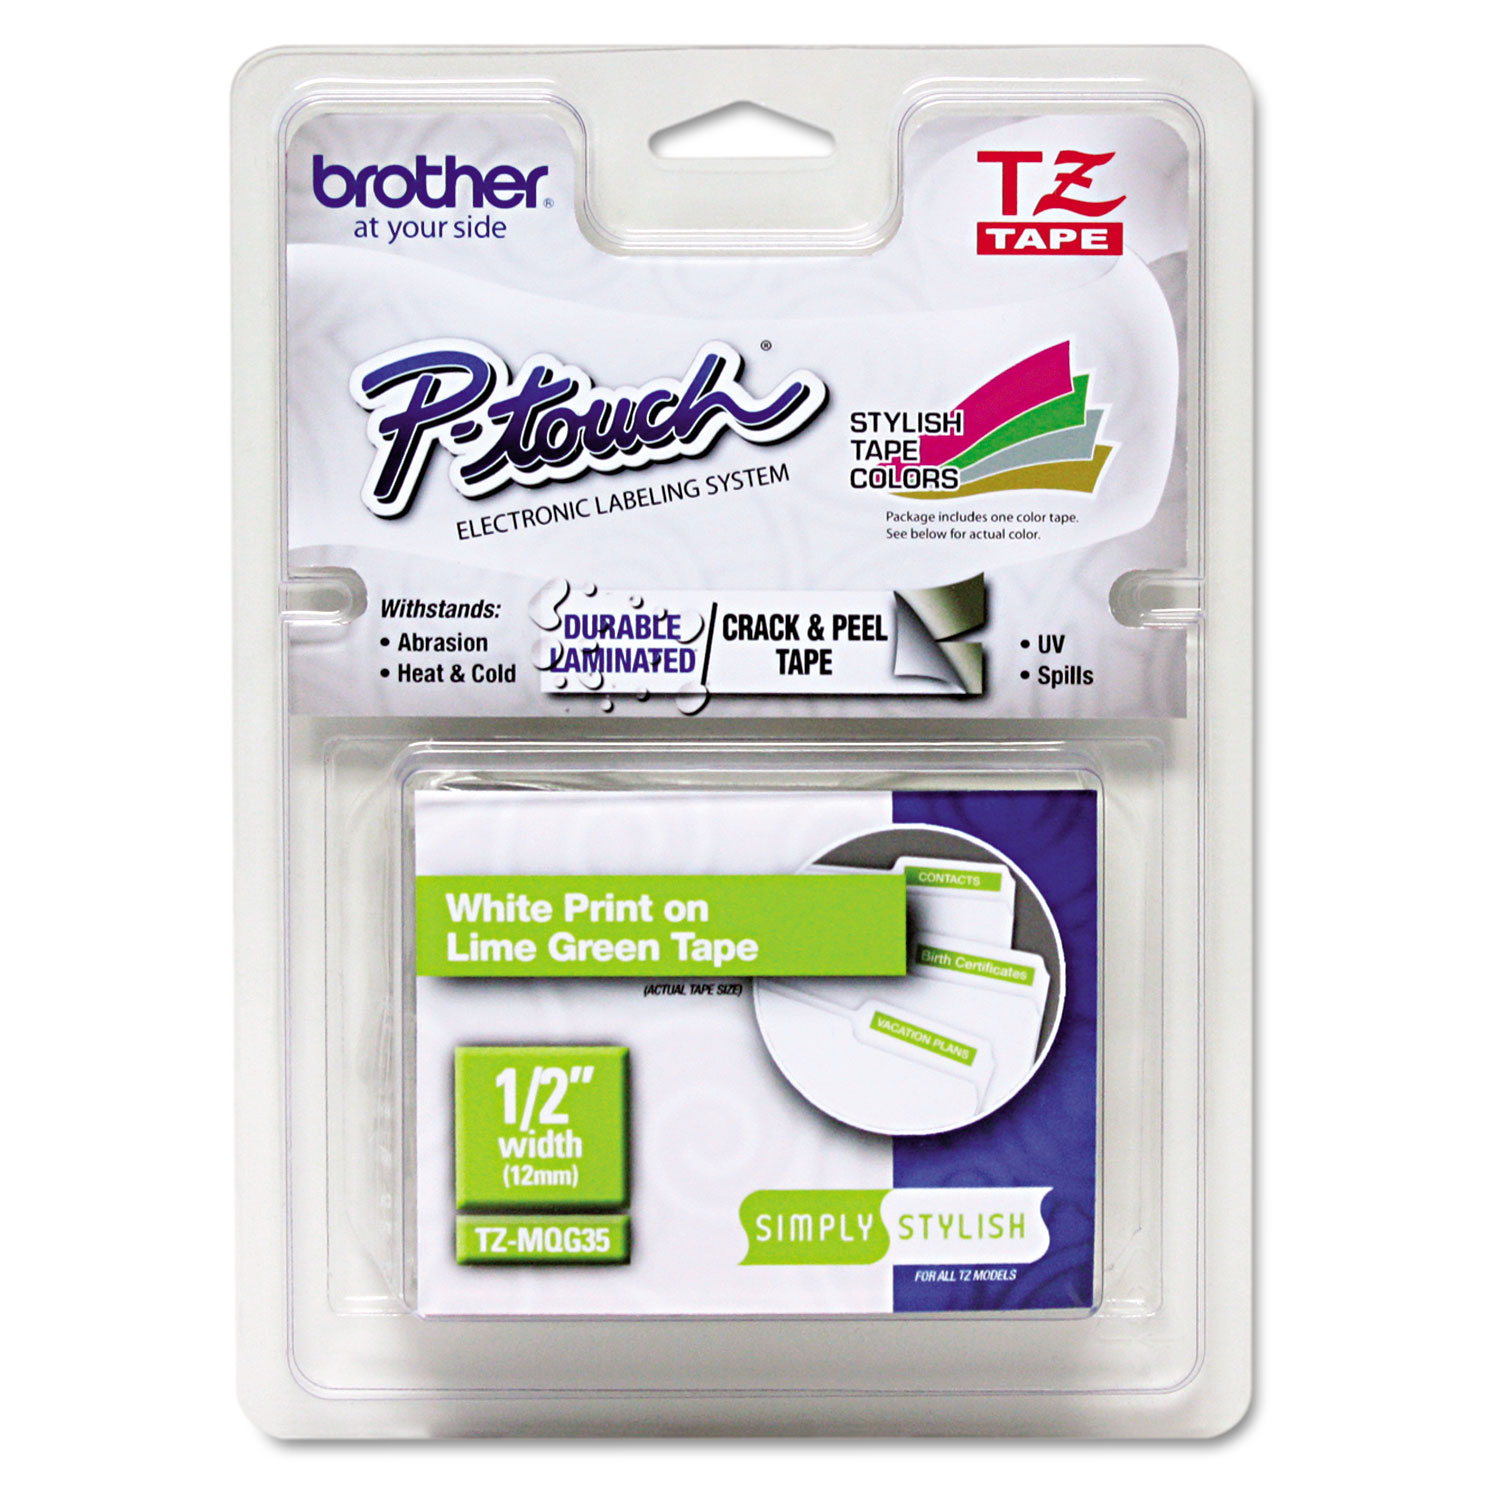  Brother P-Touch TZEMQG35 TZ Standard Adhesive Laminated Labeling Tape, 0.47 x 16.4 ft, White/Lime Green (BRTTZEMQG35) 